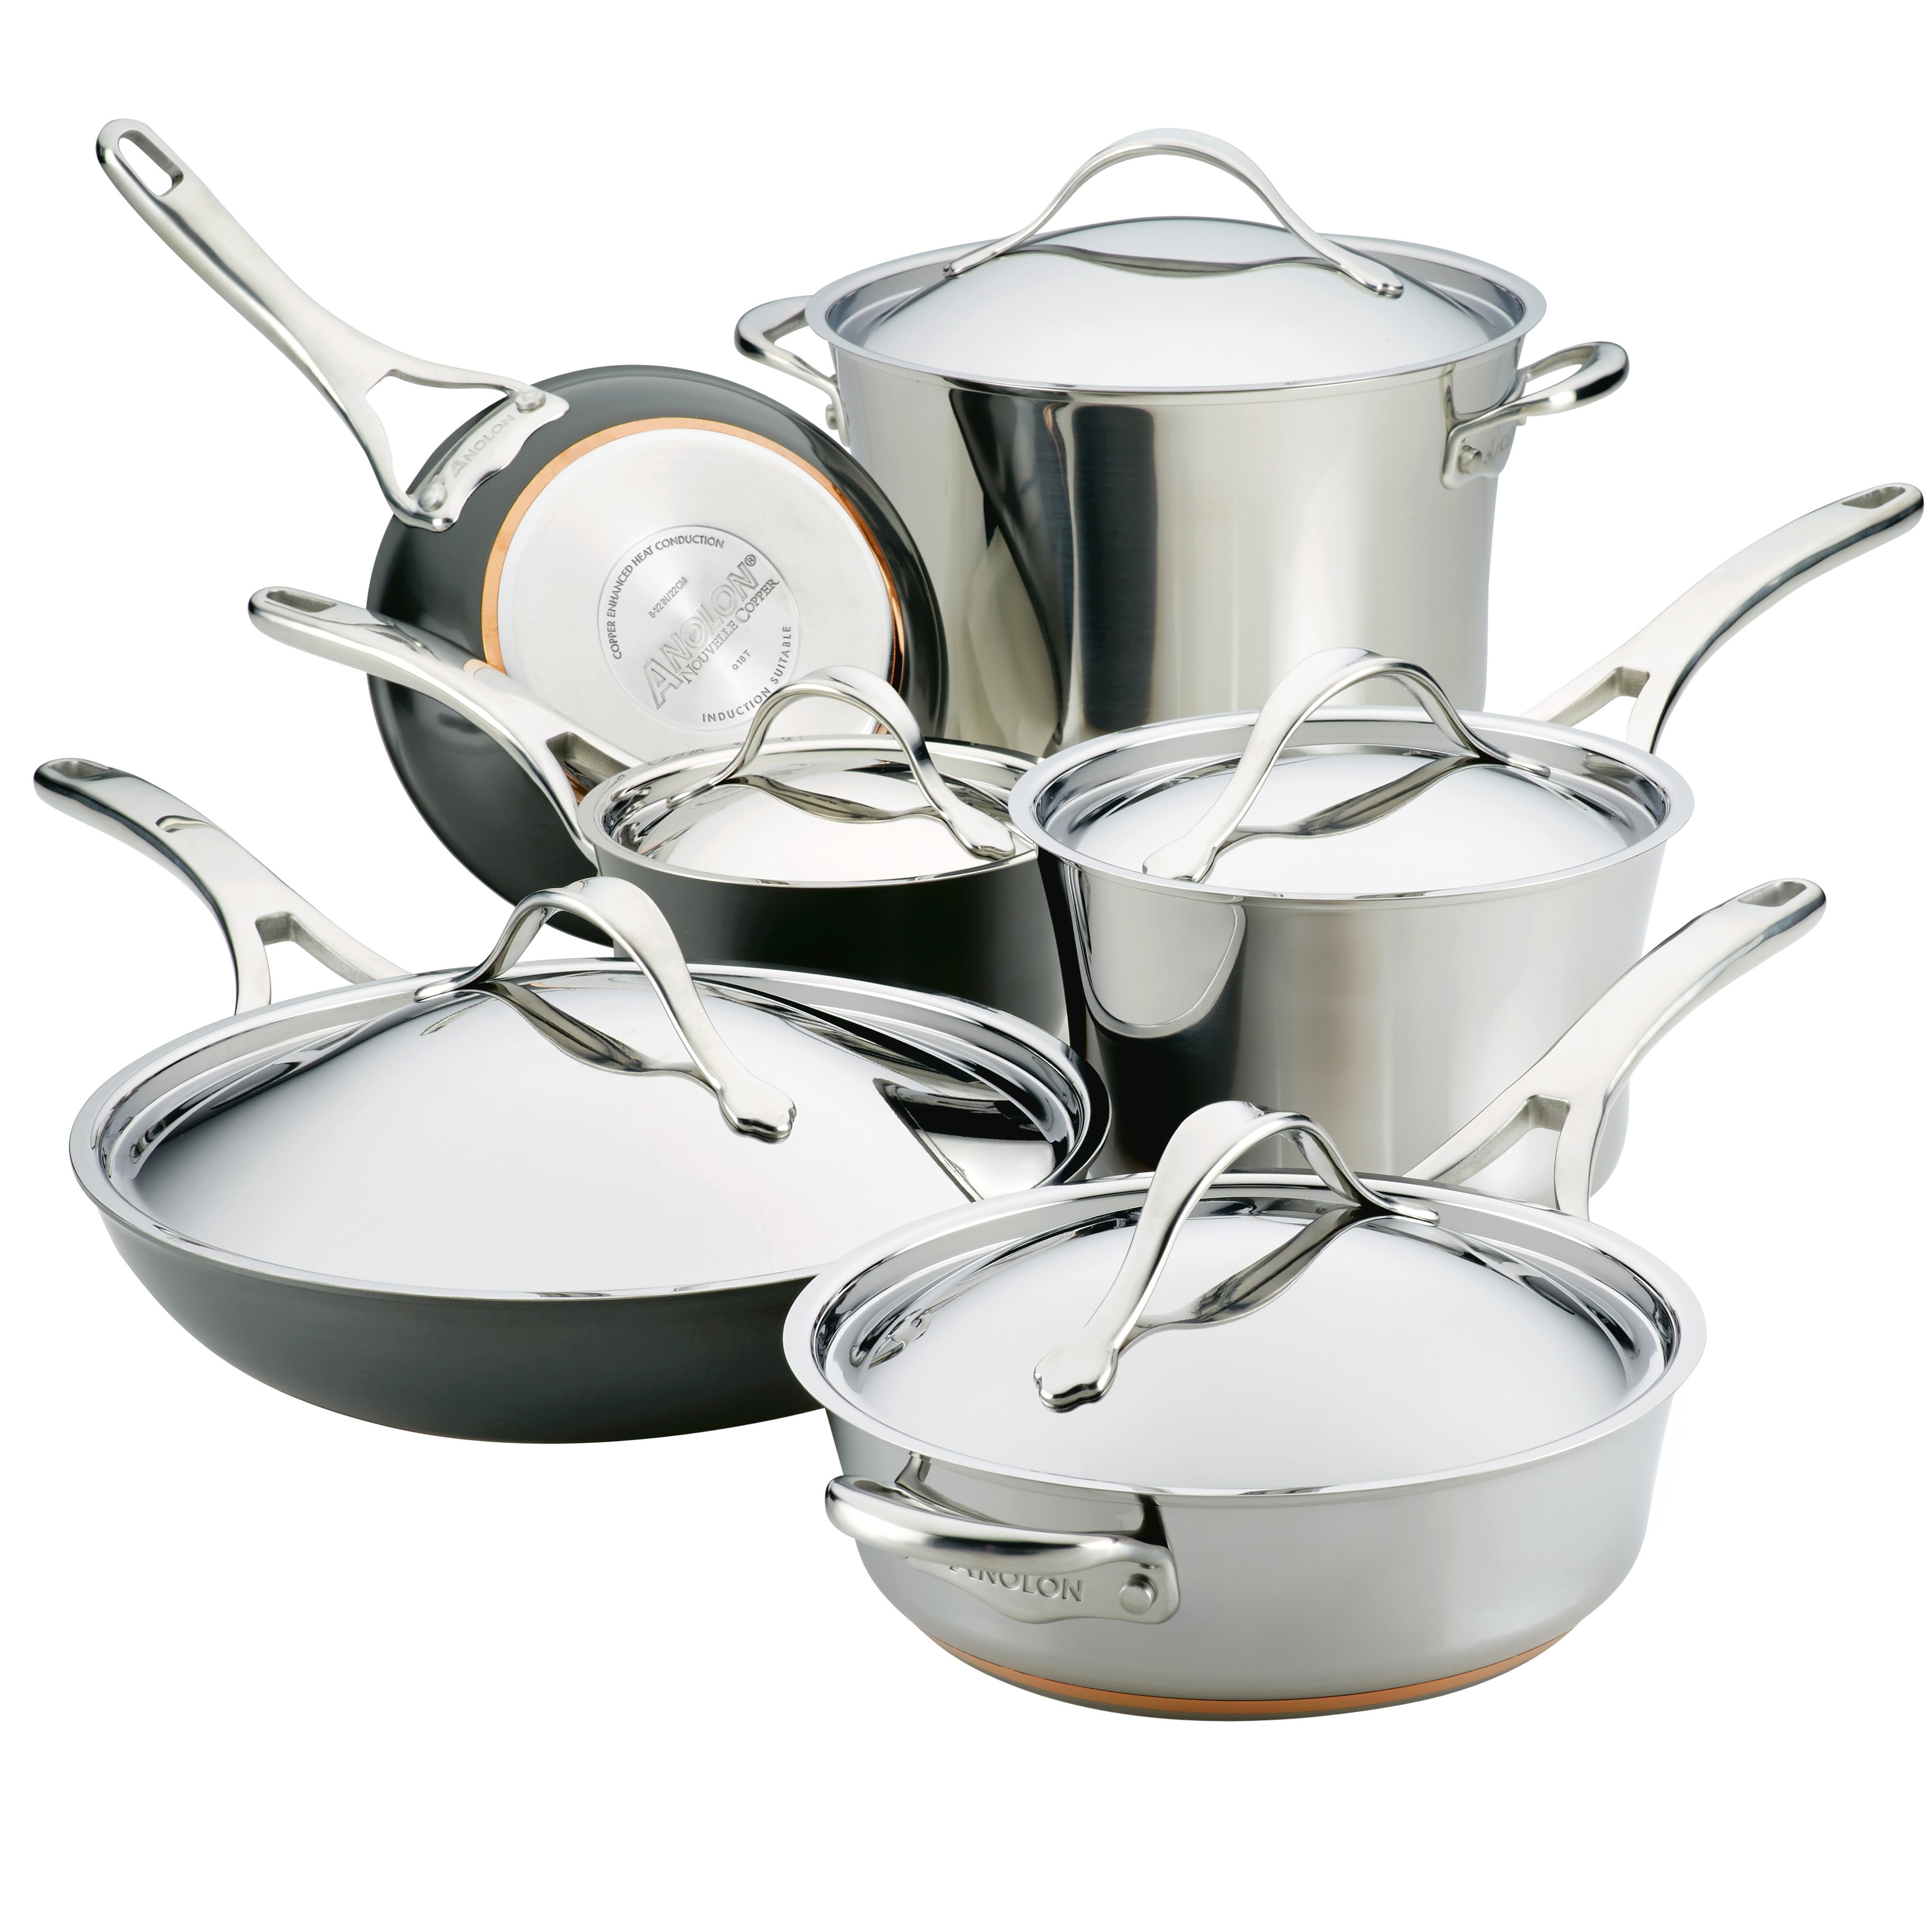  Anolon X Hybrid Nonstick Cookware Induction / Pots and